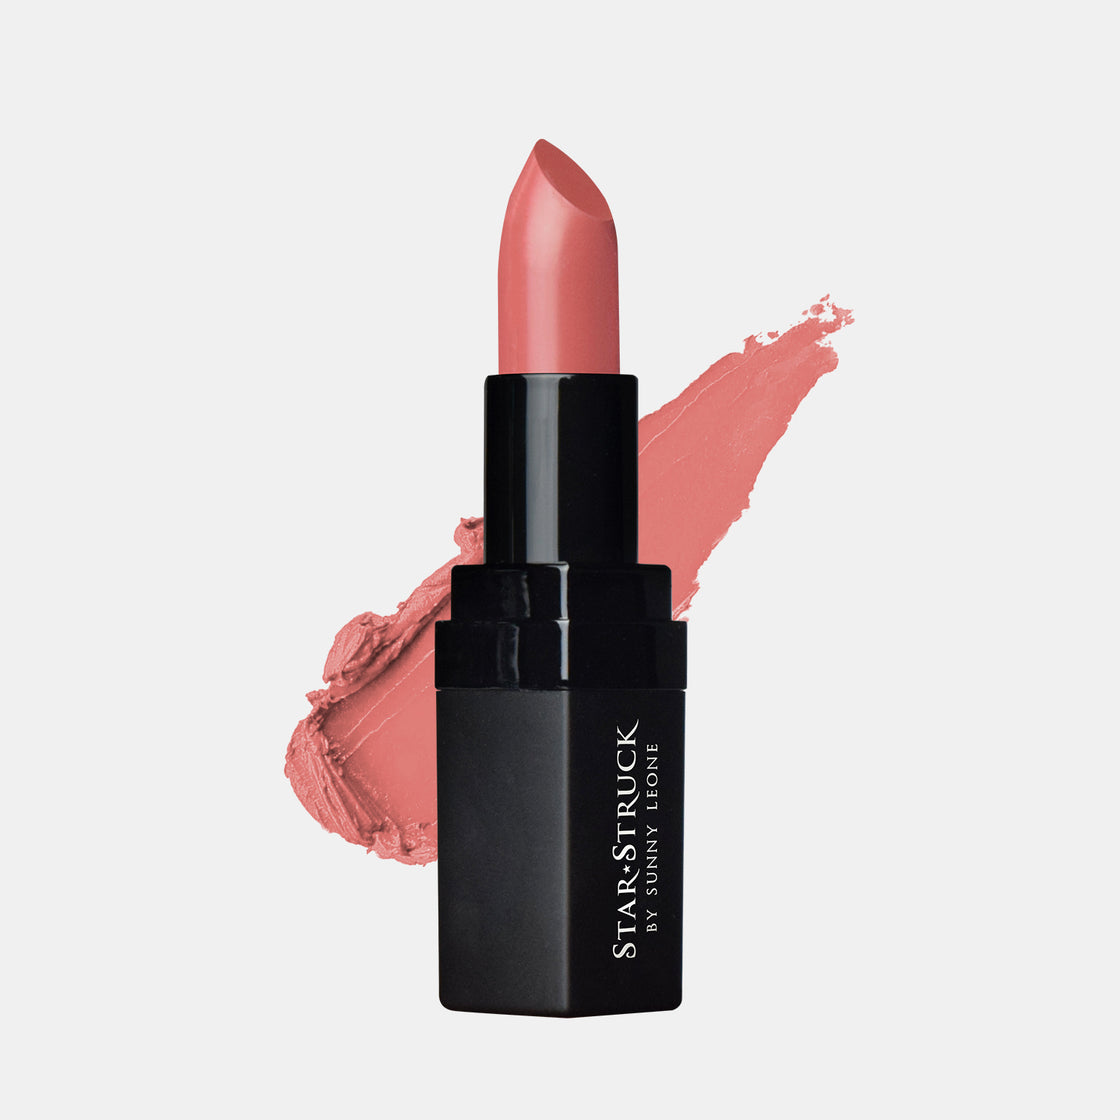 Baby Doll - Luxe Matte Lipstick, Nude Pink | 4.2gms